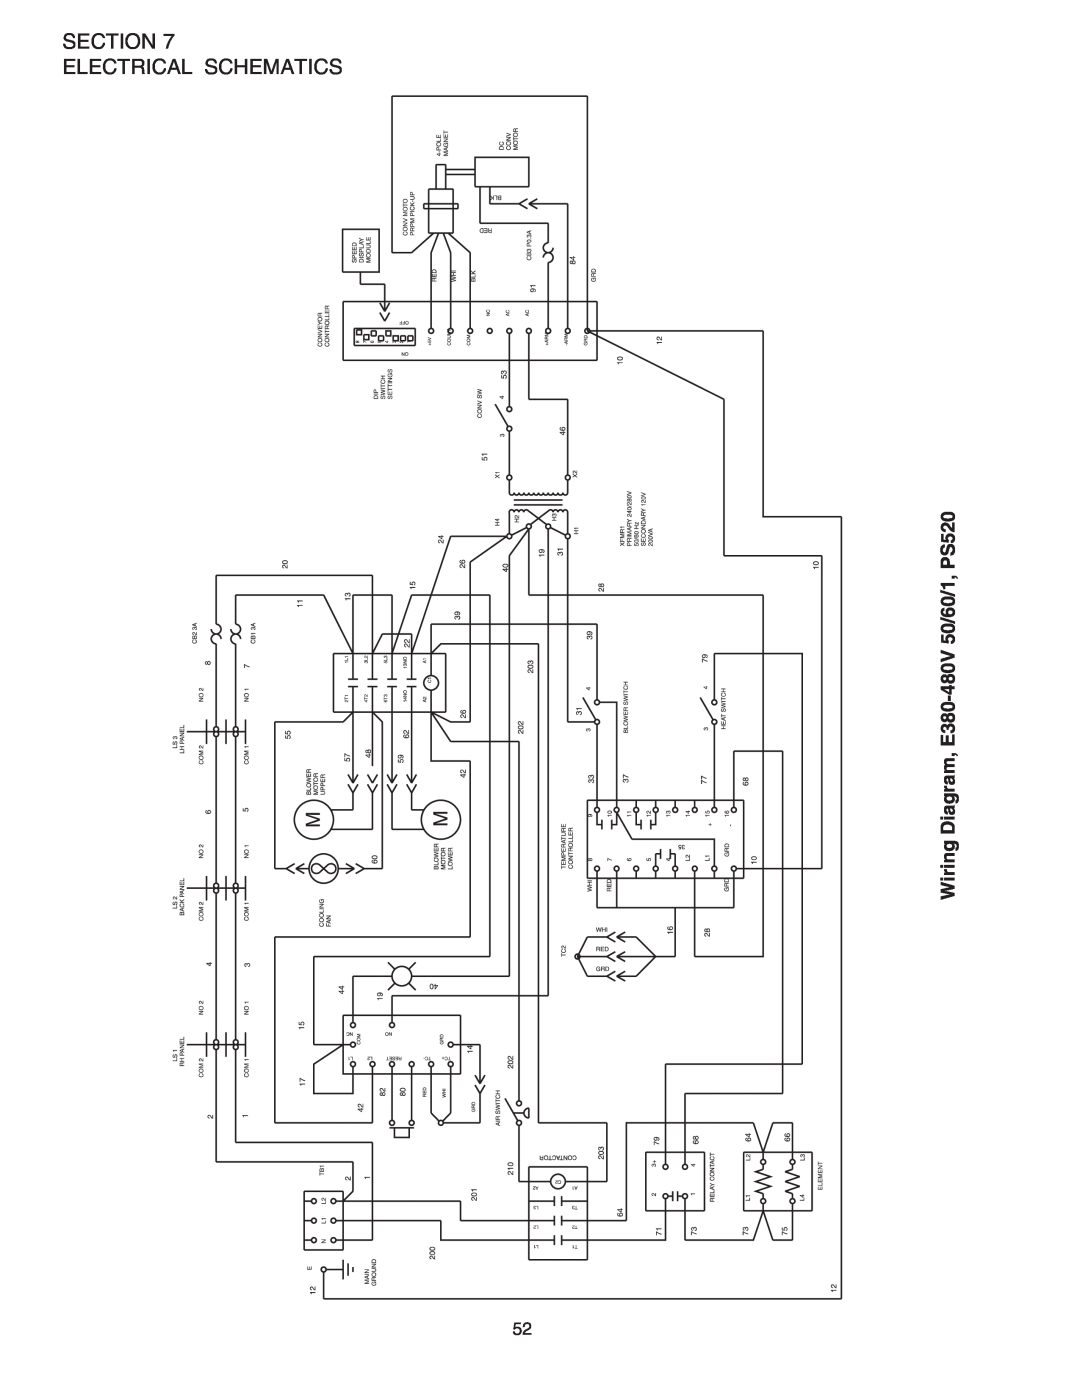 Middleby Marshall installation manual Section Electrical Schematics, Wiring Diagram, E380-480V50/60/1, PS520 